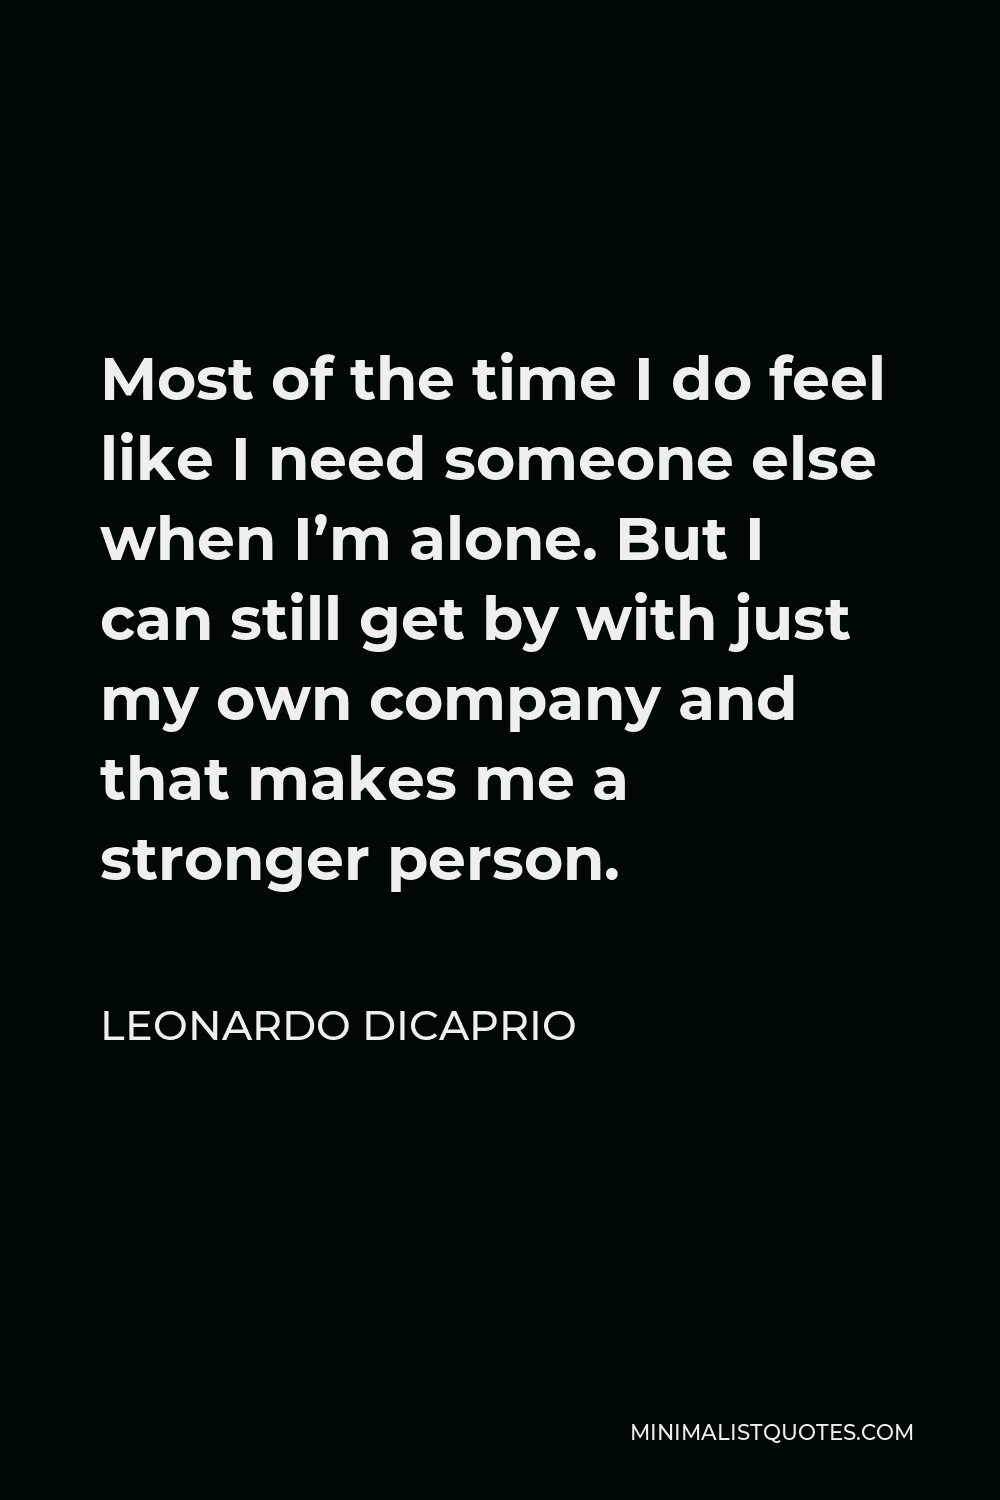 Leonardo DiCaprio Quote - Most of the time I do feel like I need someone else when I’m alone. But I can still get by with just my own company and that makes me a stronger person.